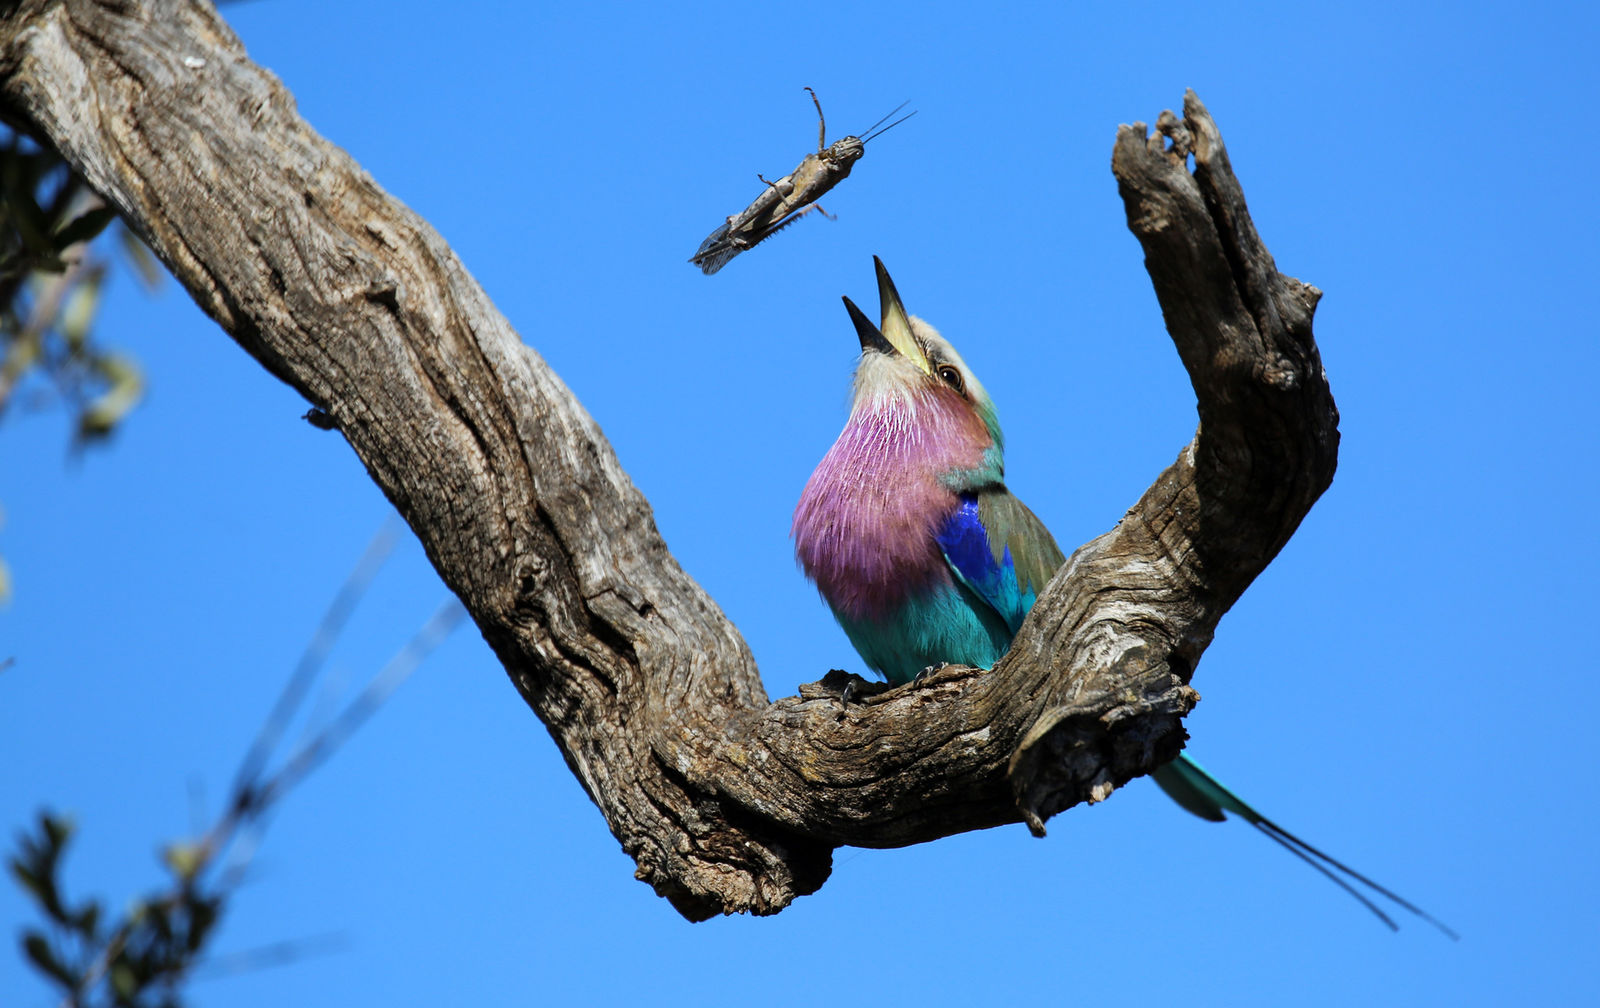 Lilac-breasted roller catching its prey